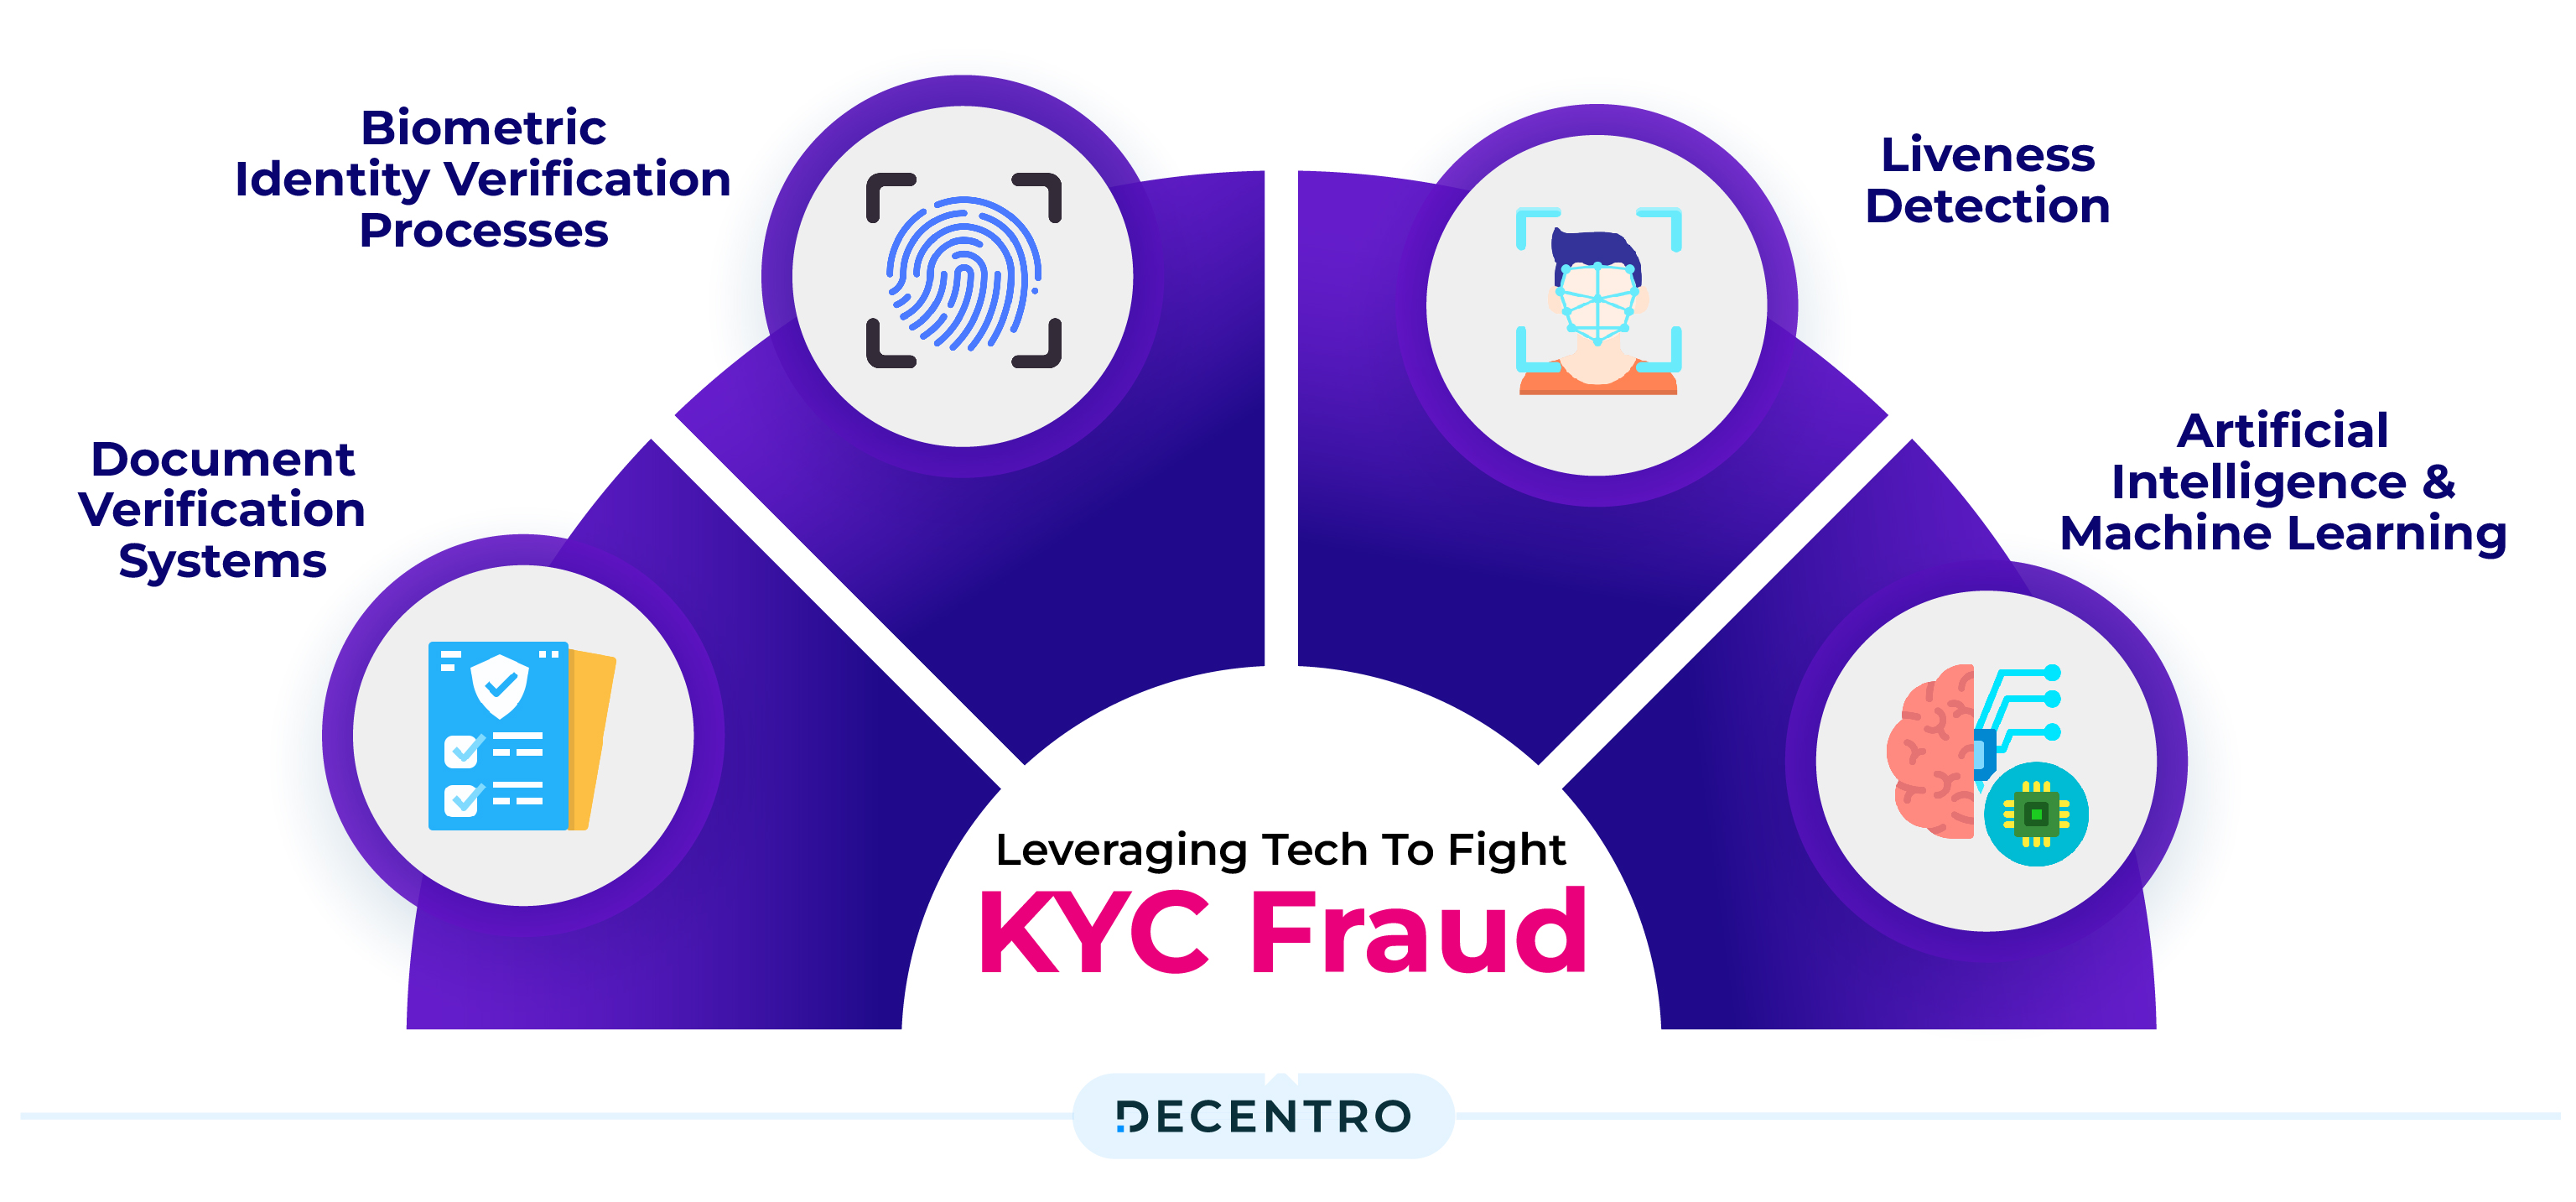 Leveraging tech to fight KYC Fraud